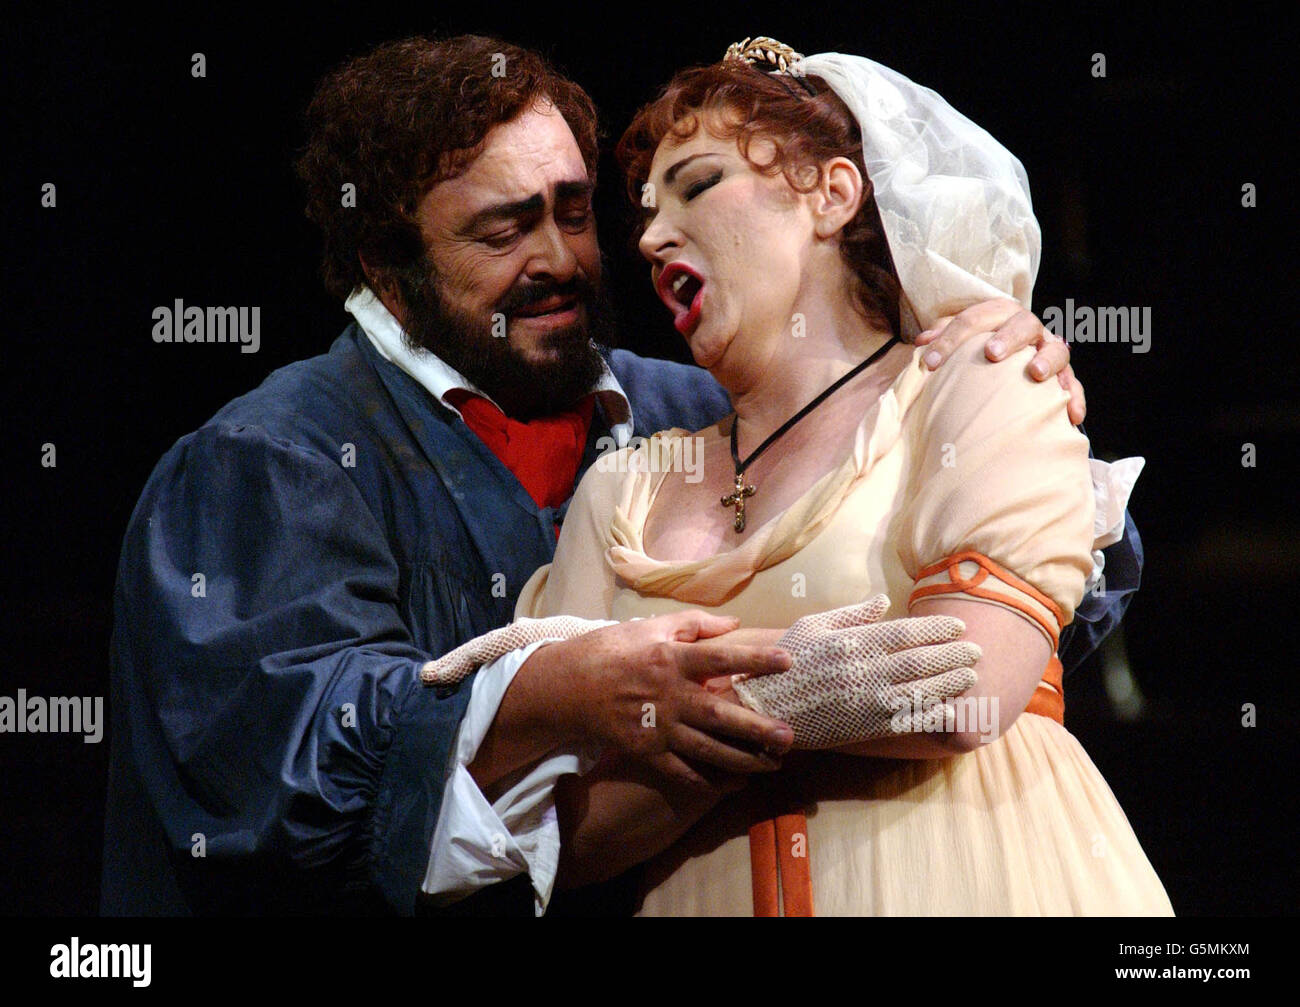 Italian tenor Luciano Pavarotti playing the role of Cavaradossi and Carol Vaness who plays Tosca rehearse the opera Tosca at the Royal Opera House in London's Covent Garden. Stock Photo